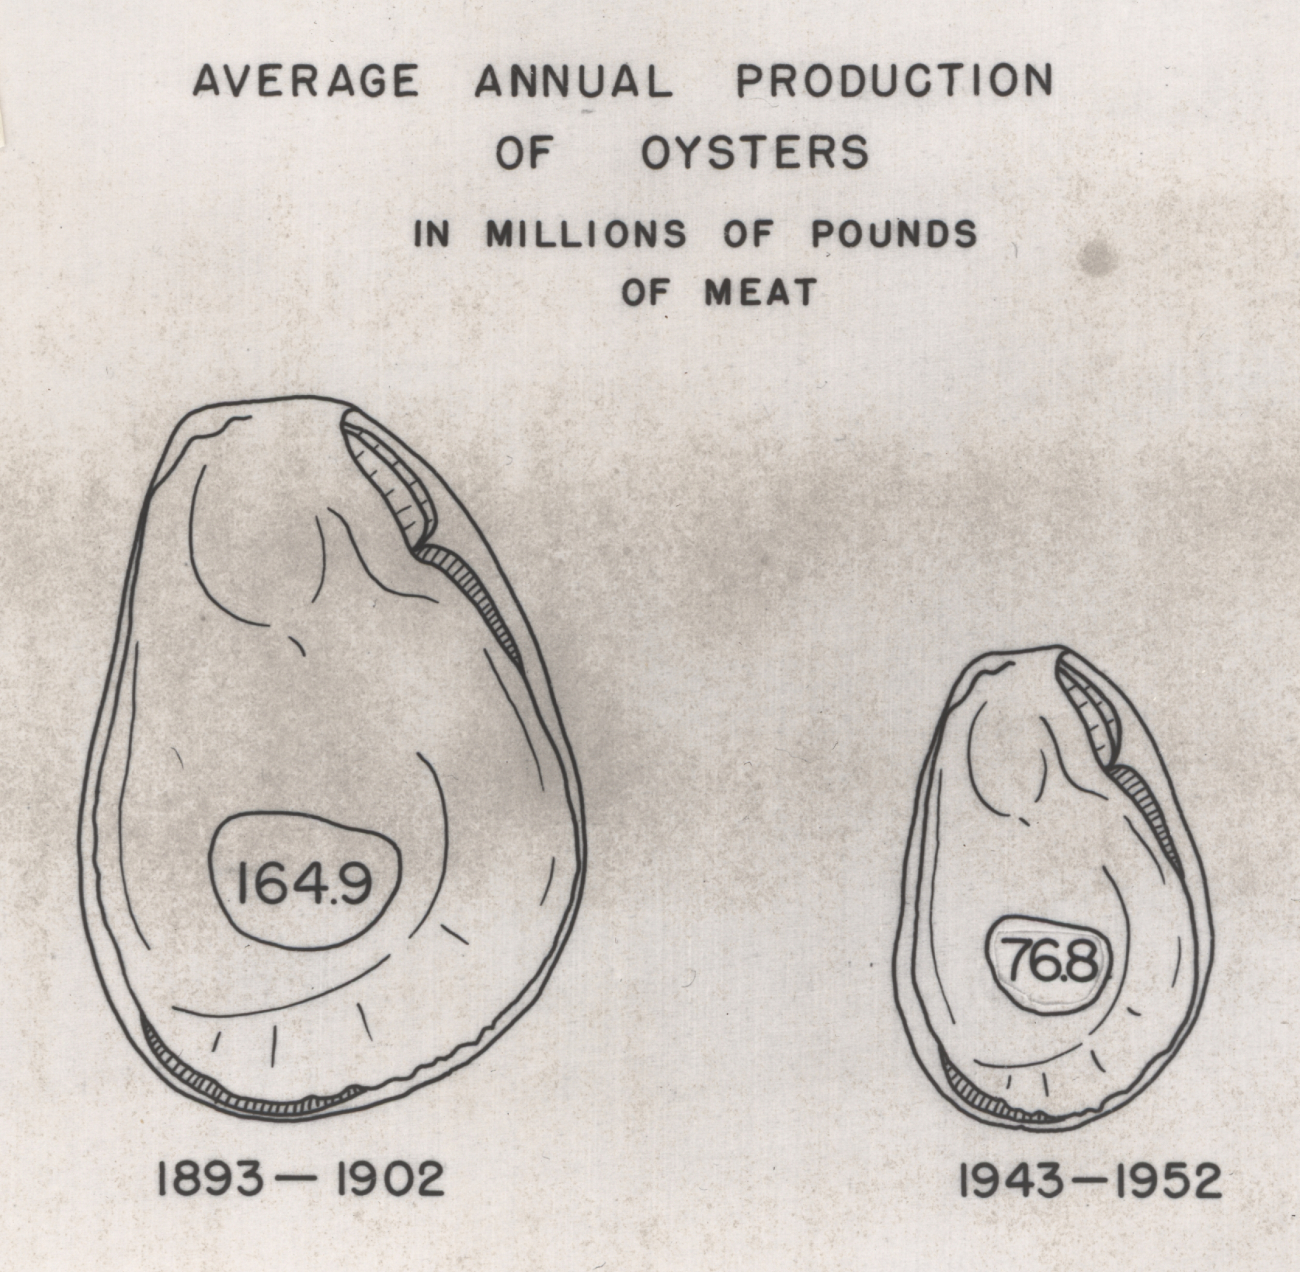 Average annual production of oysters in pounds showing decline when comparing1893-1902 (164